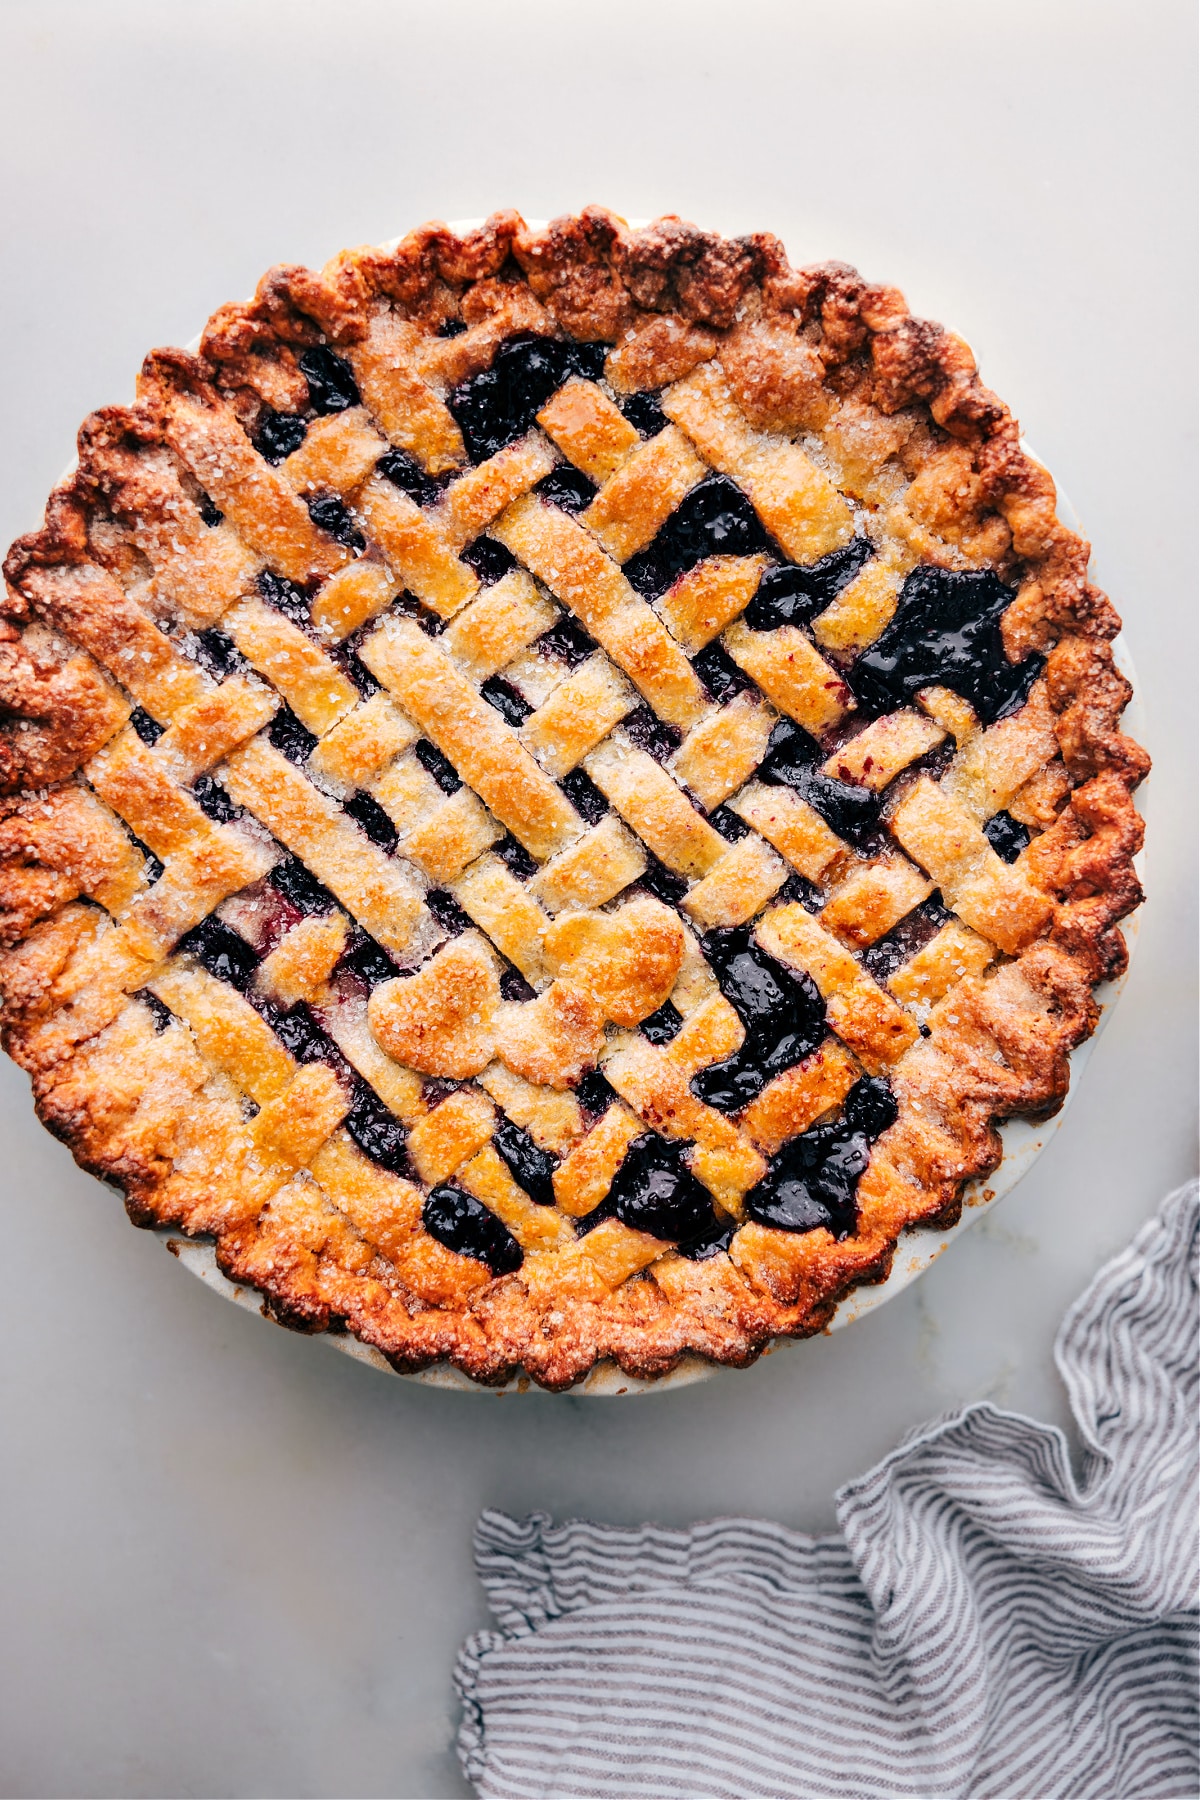 Freshly baked berry pie made with the best pie crust recipe, ready to be served.